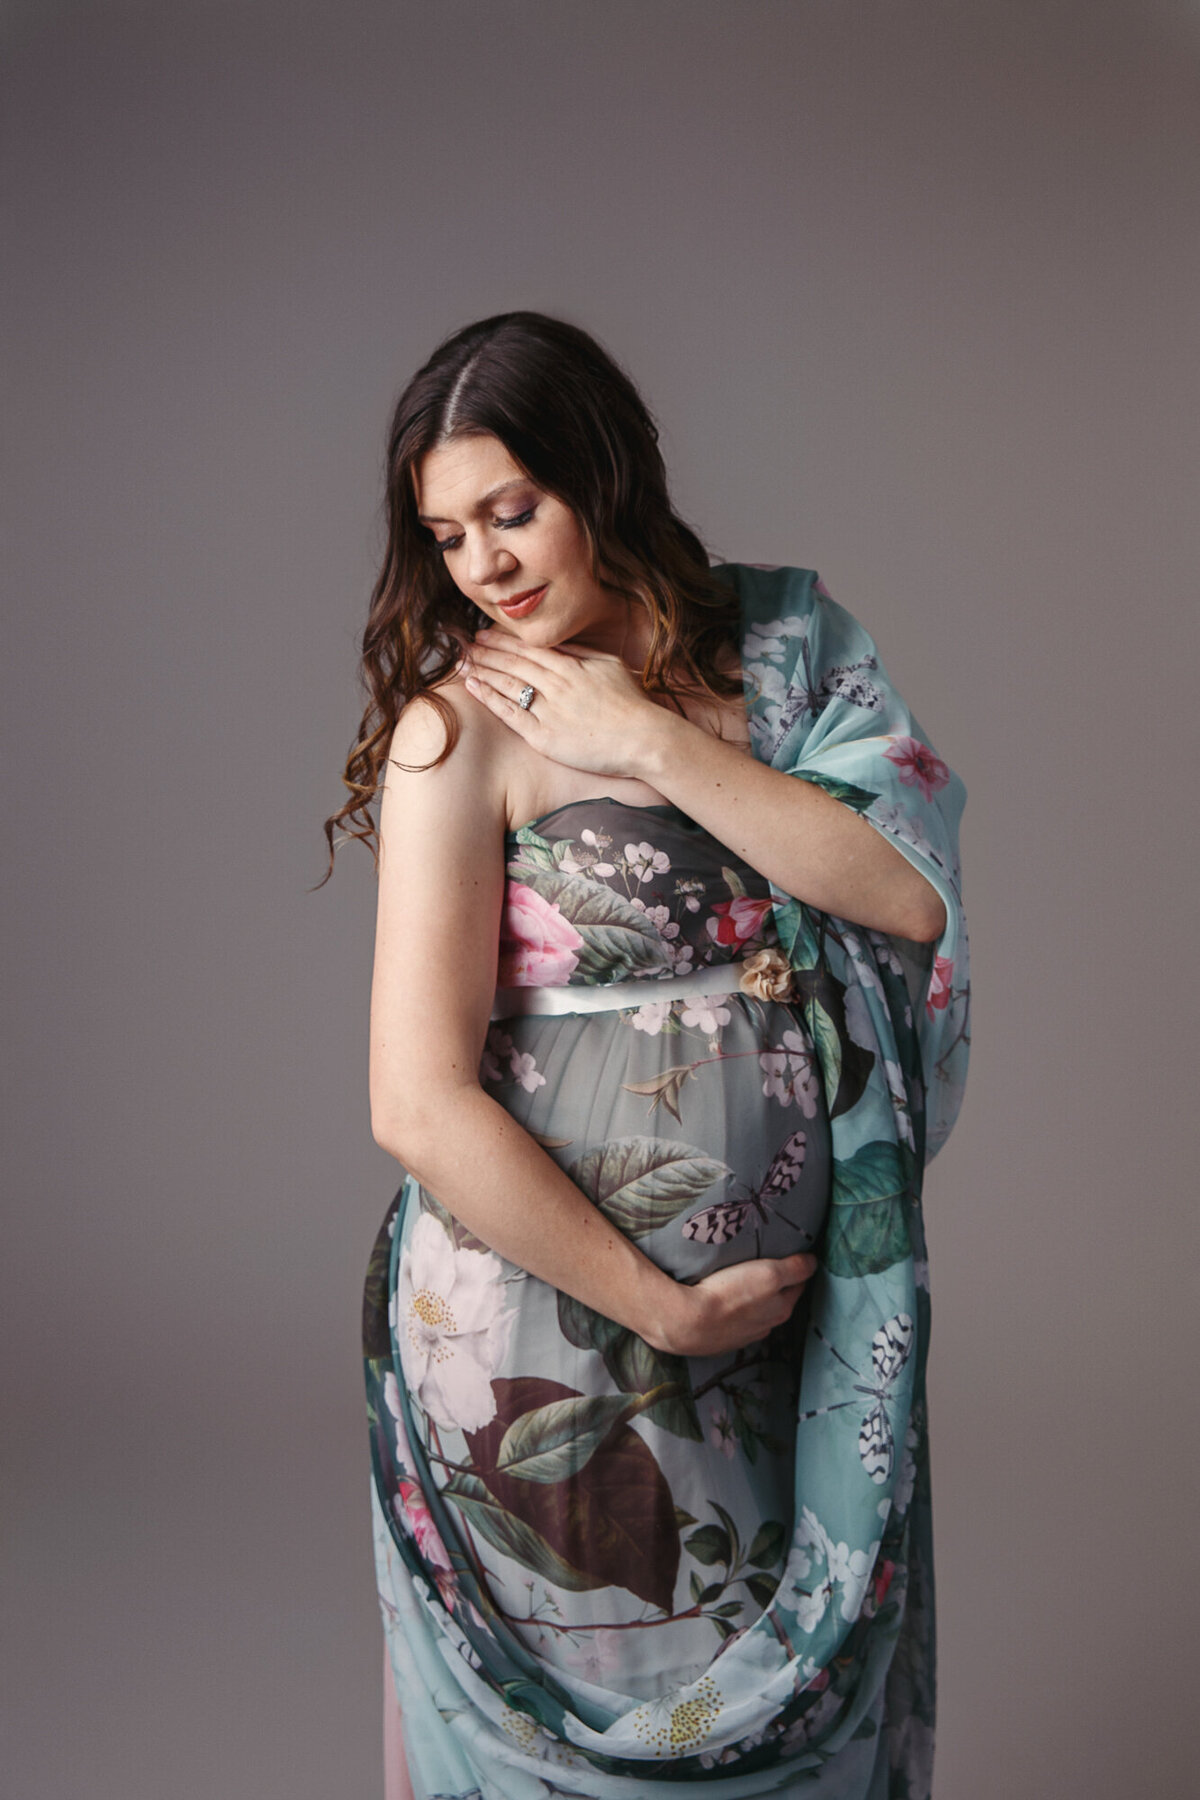 Maternity photo shoot with a beautiful woman wearing a green floral gown